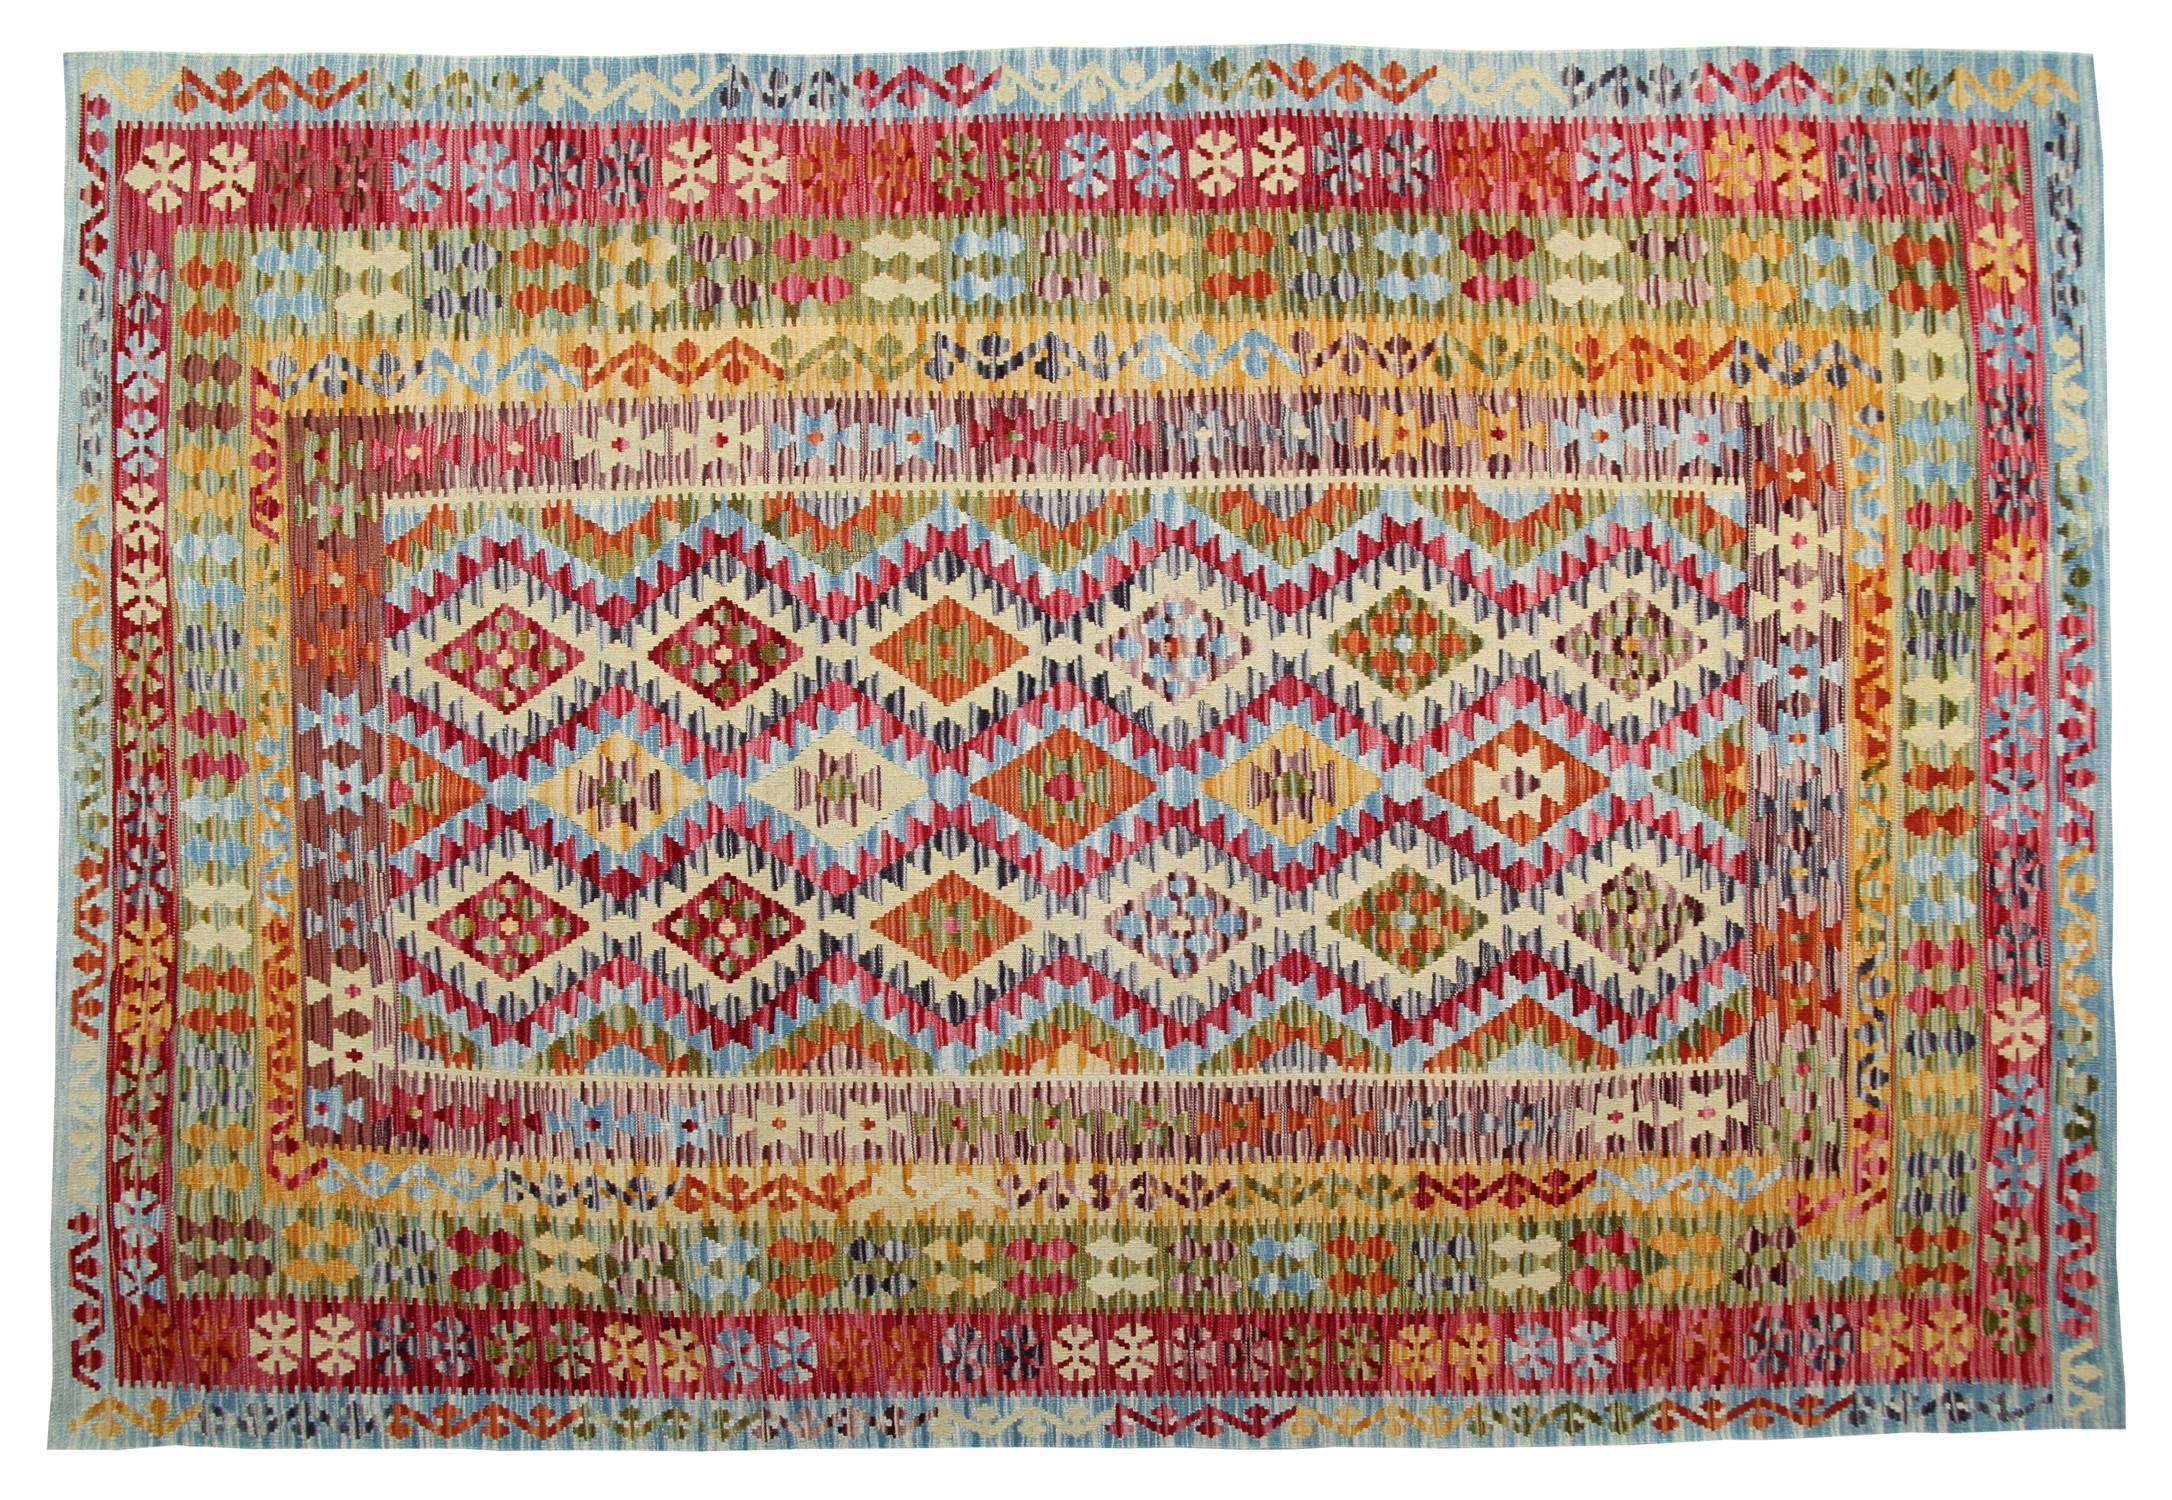 This Kilim is ultimately traditional rugs, but it shows striking modern rugs features and so it has been defined as 'eclectic'. The colors are psychedelic: fuchsia, orange, yellow, red and cadet blue. However, the design is traditional and